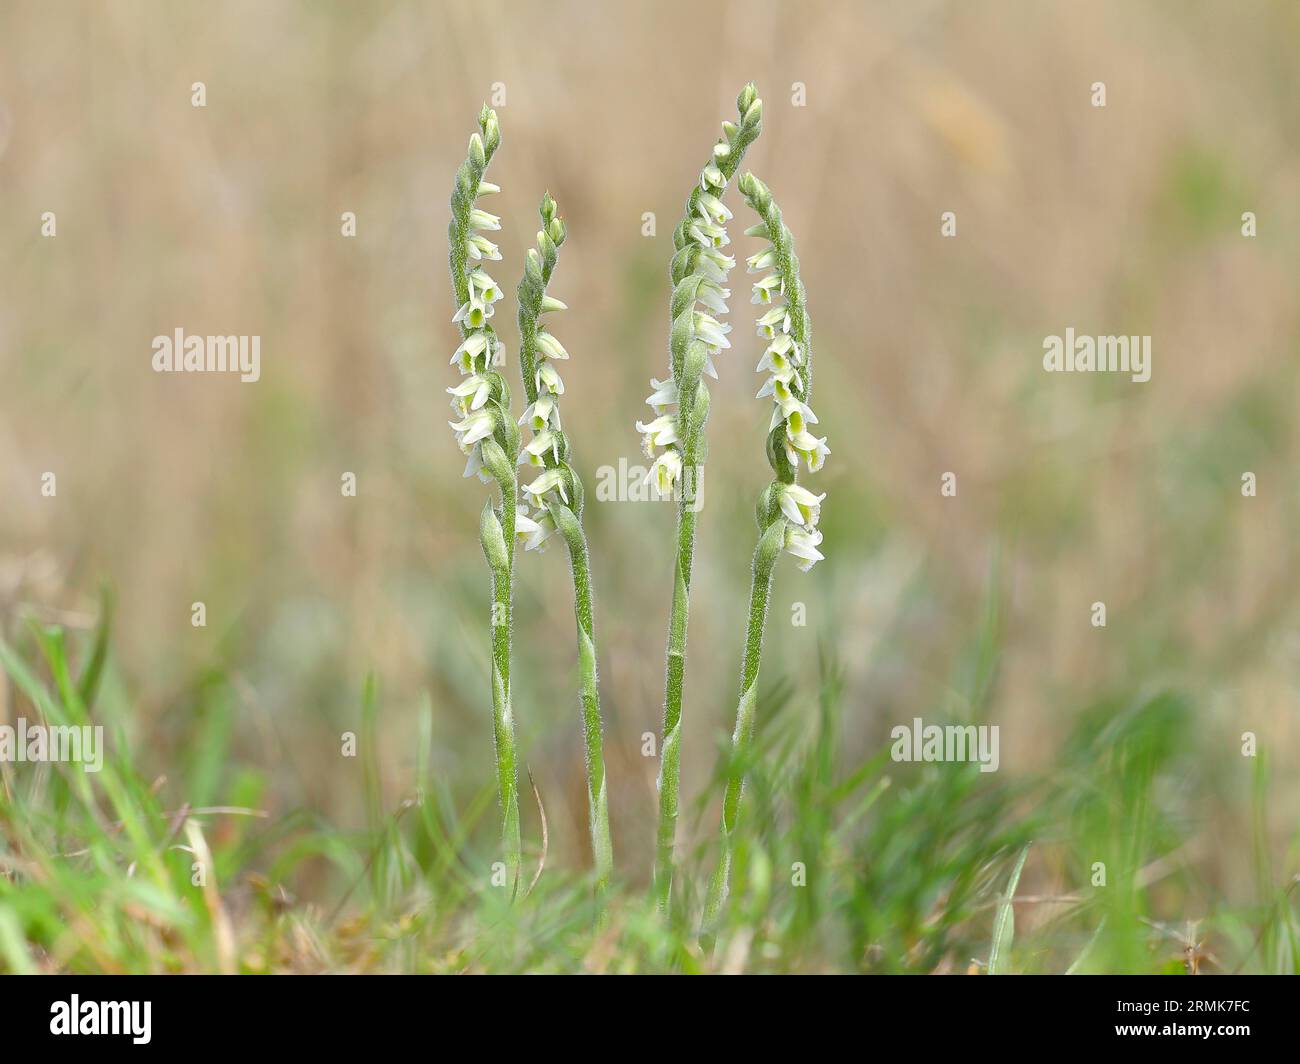 Autumn lady's-tresses (Spiranthes spiralis), flowering plant group, Hesse, Germany Stock Photo